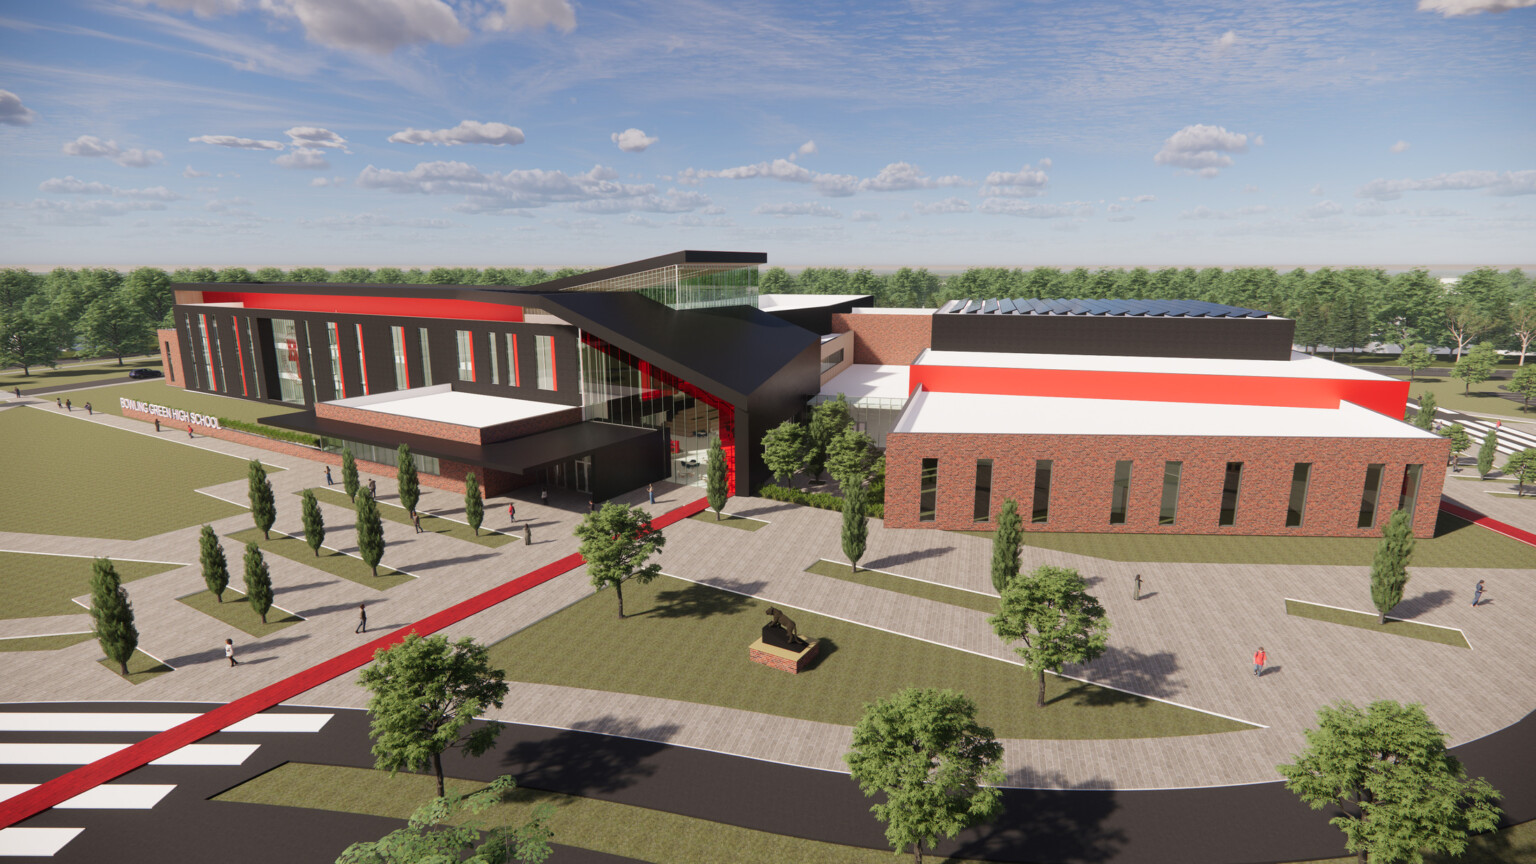 Rendering of Bowling Green City Schools facility designed for their Educational Facilities Master Plan brick building with red accents